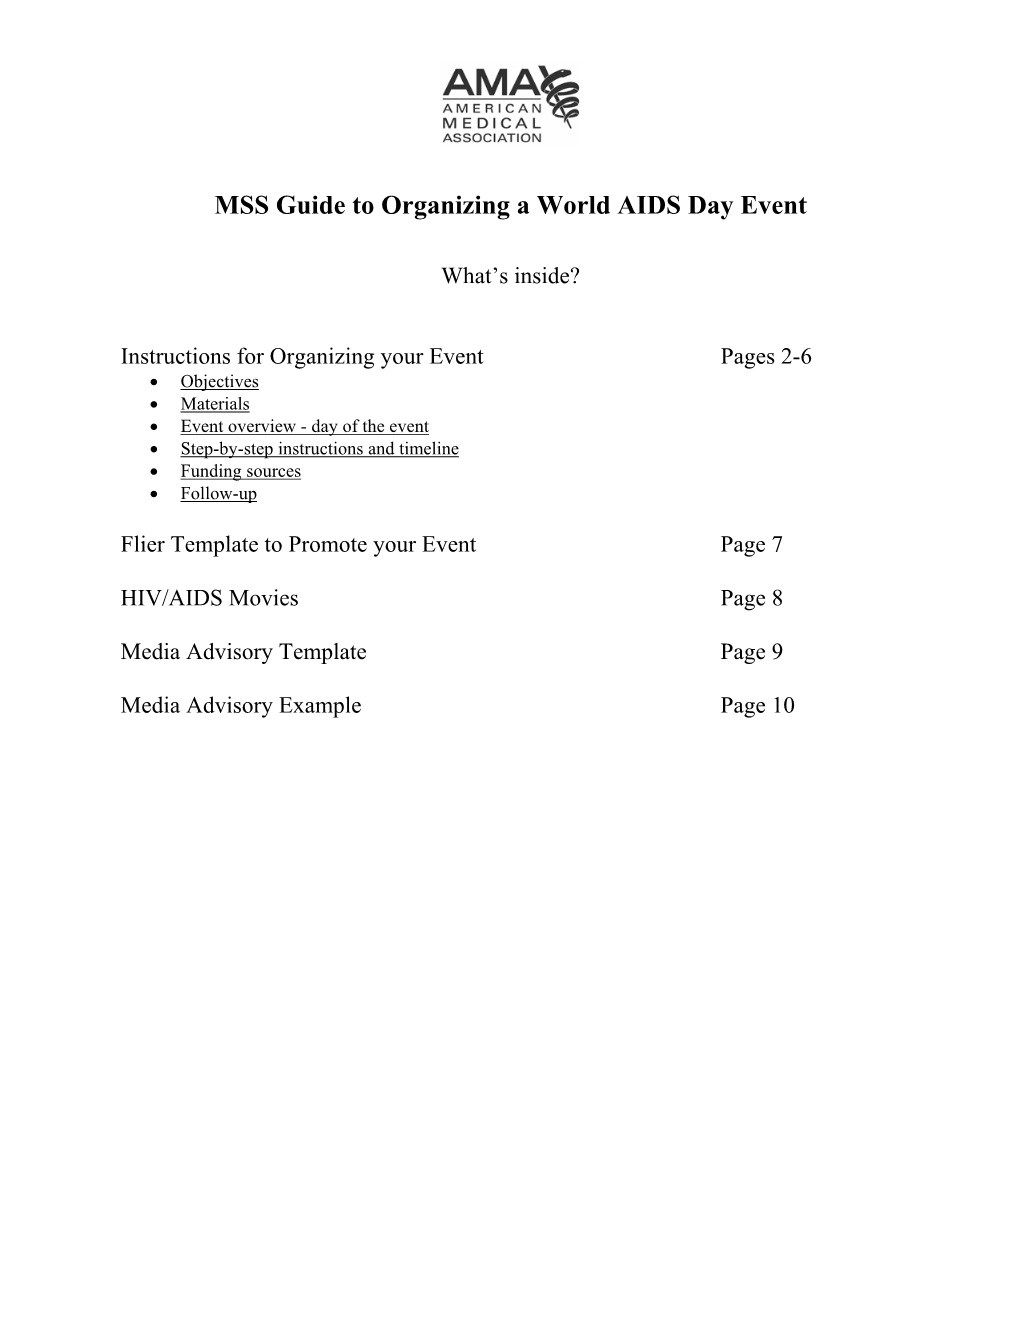 AMA-MSS Guide to Organizing a World AIDS Day Event